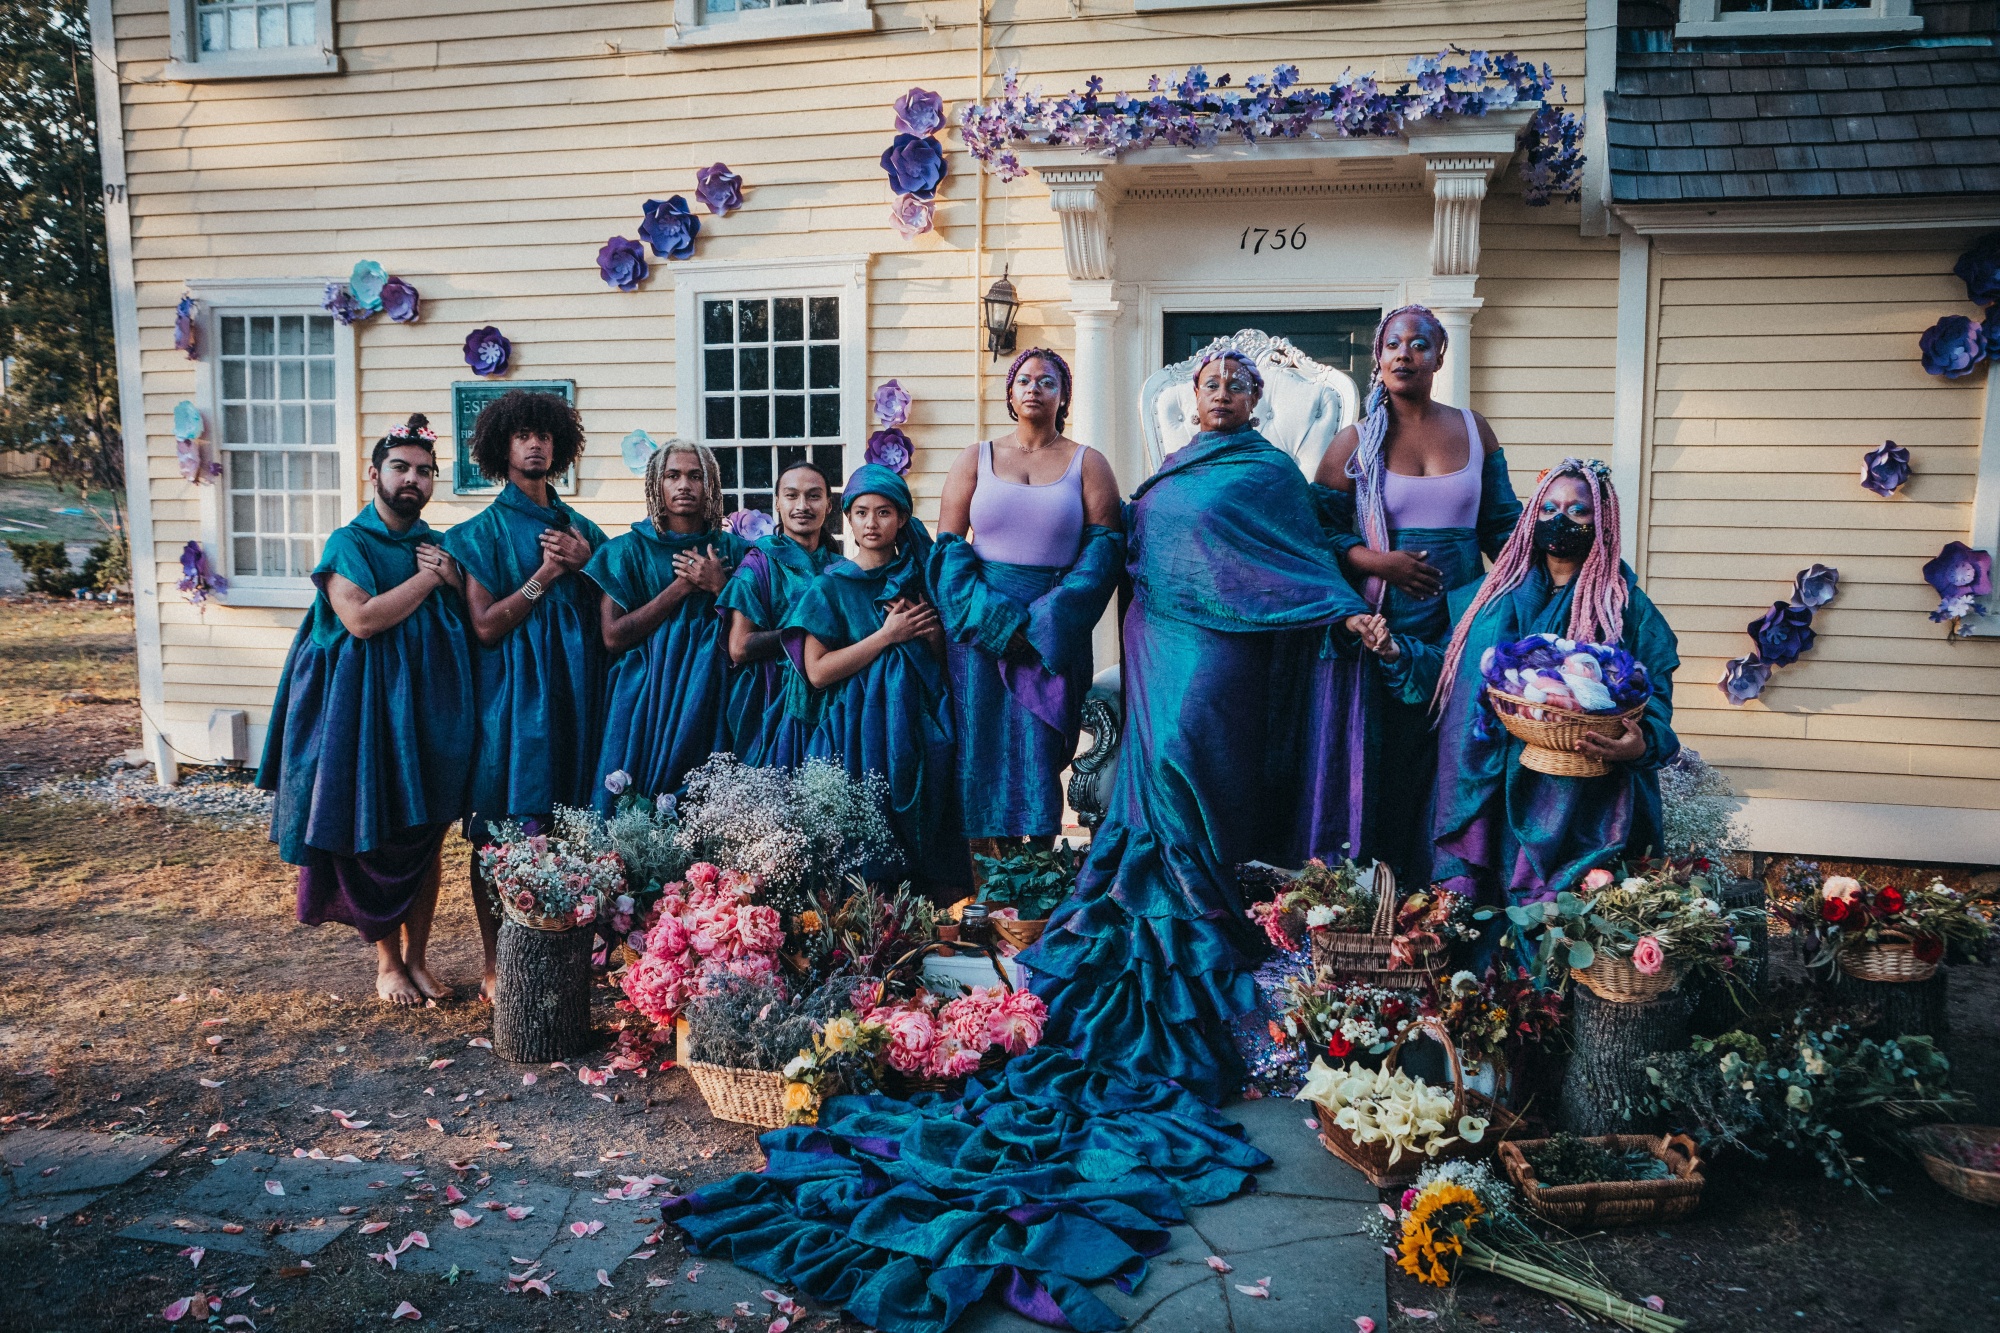 With the city’s support, Providence’s Haus of Glitter reclaimed a historic site whose 18th-century builder profited from slavery.